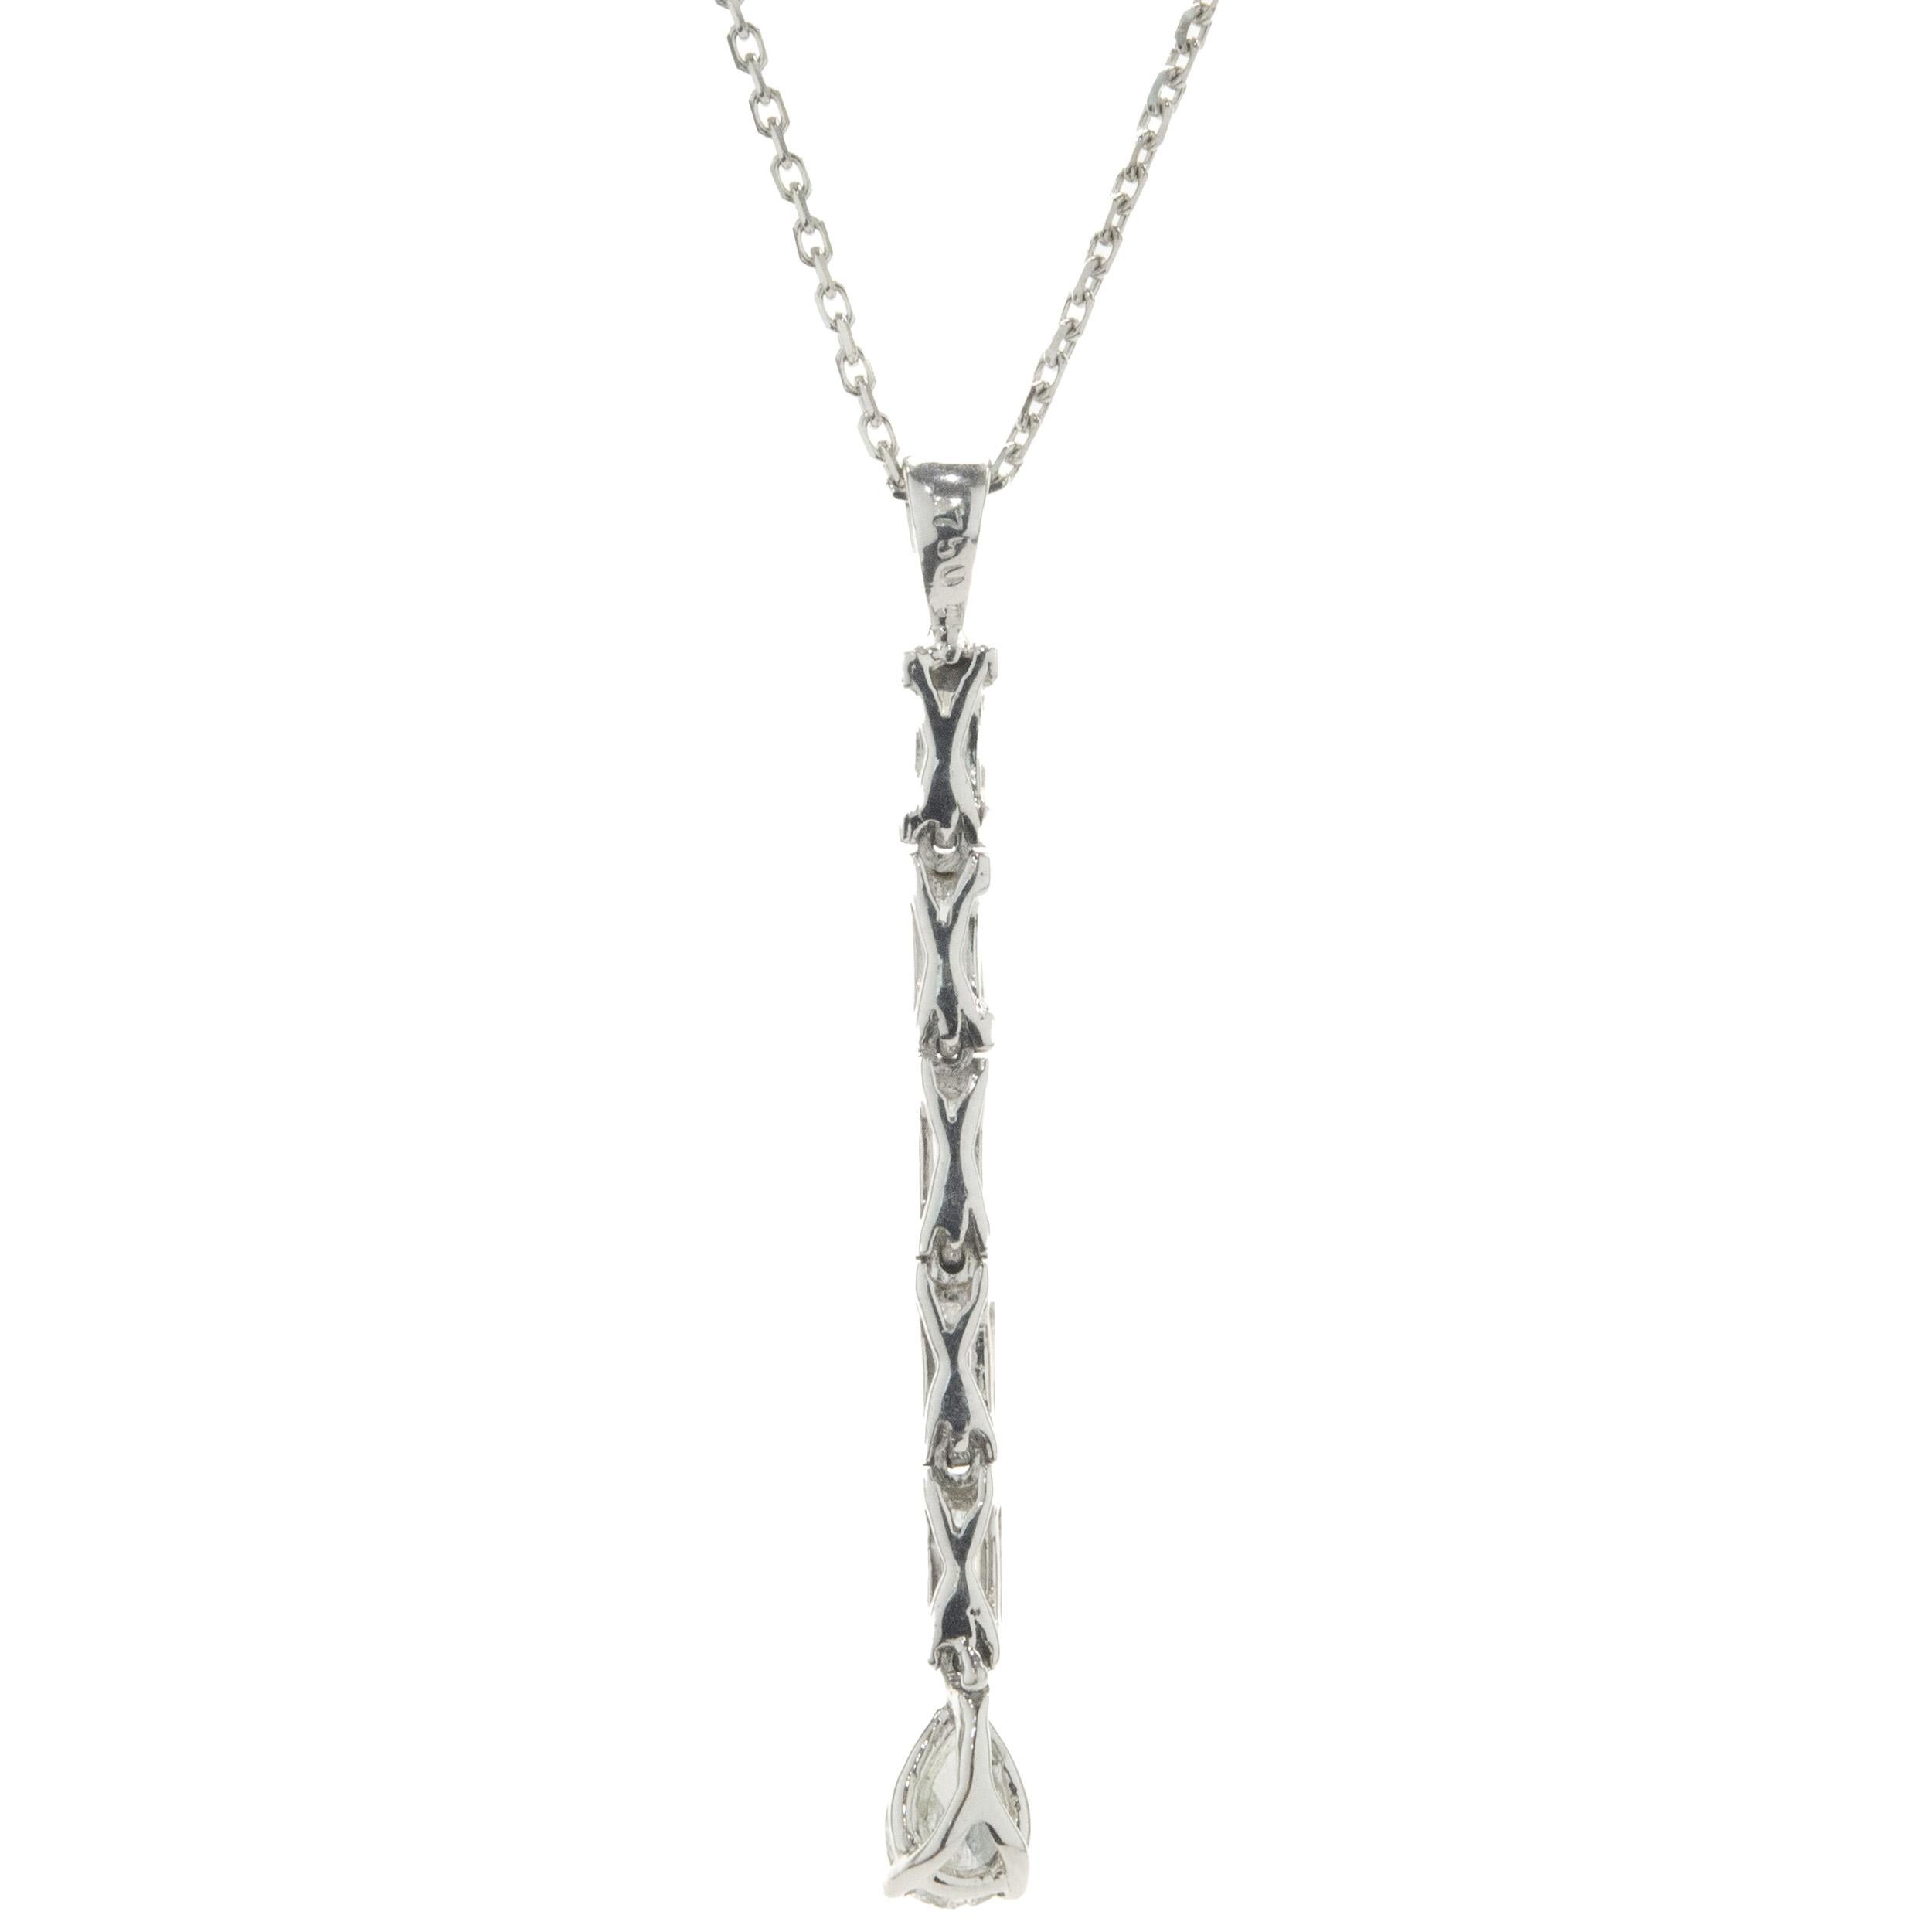 Designer: custom design
Material: 18K white gold
Diamond: 5 baguette cut & 1 pear cut = 0.40cttw
Color: H
Clarity: SI1
Dimensions: necklace measures 18-inches in length 
Weight: 3.23 grams